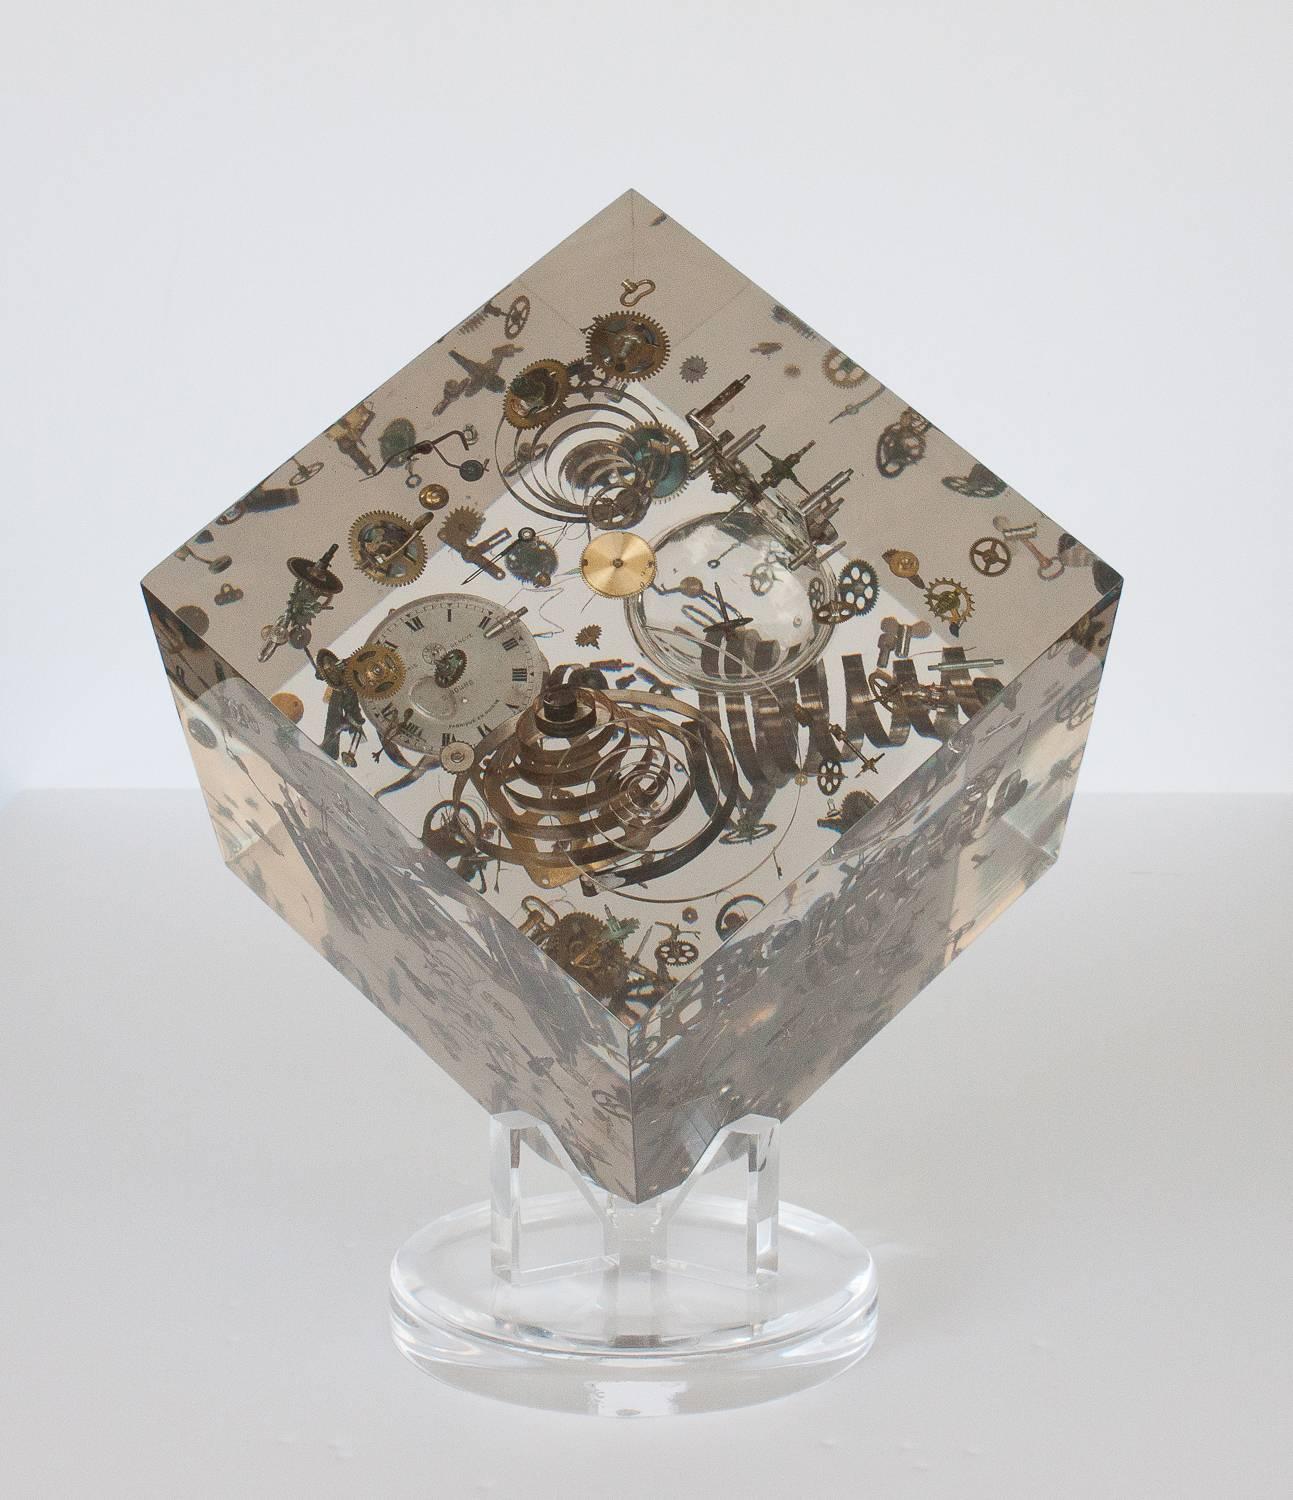 Incredible Lucite cube sculpture with exploded clock or watch parts in the style of Pierre Giraudon. Amazing scale and quite conversational! 11